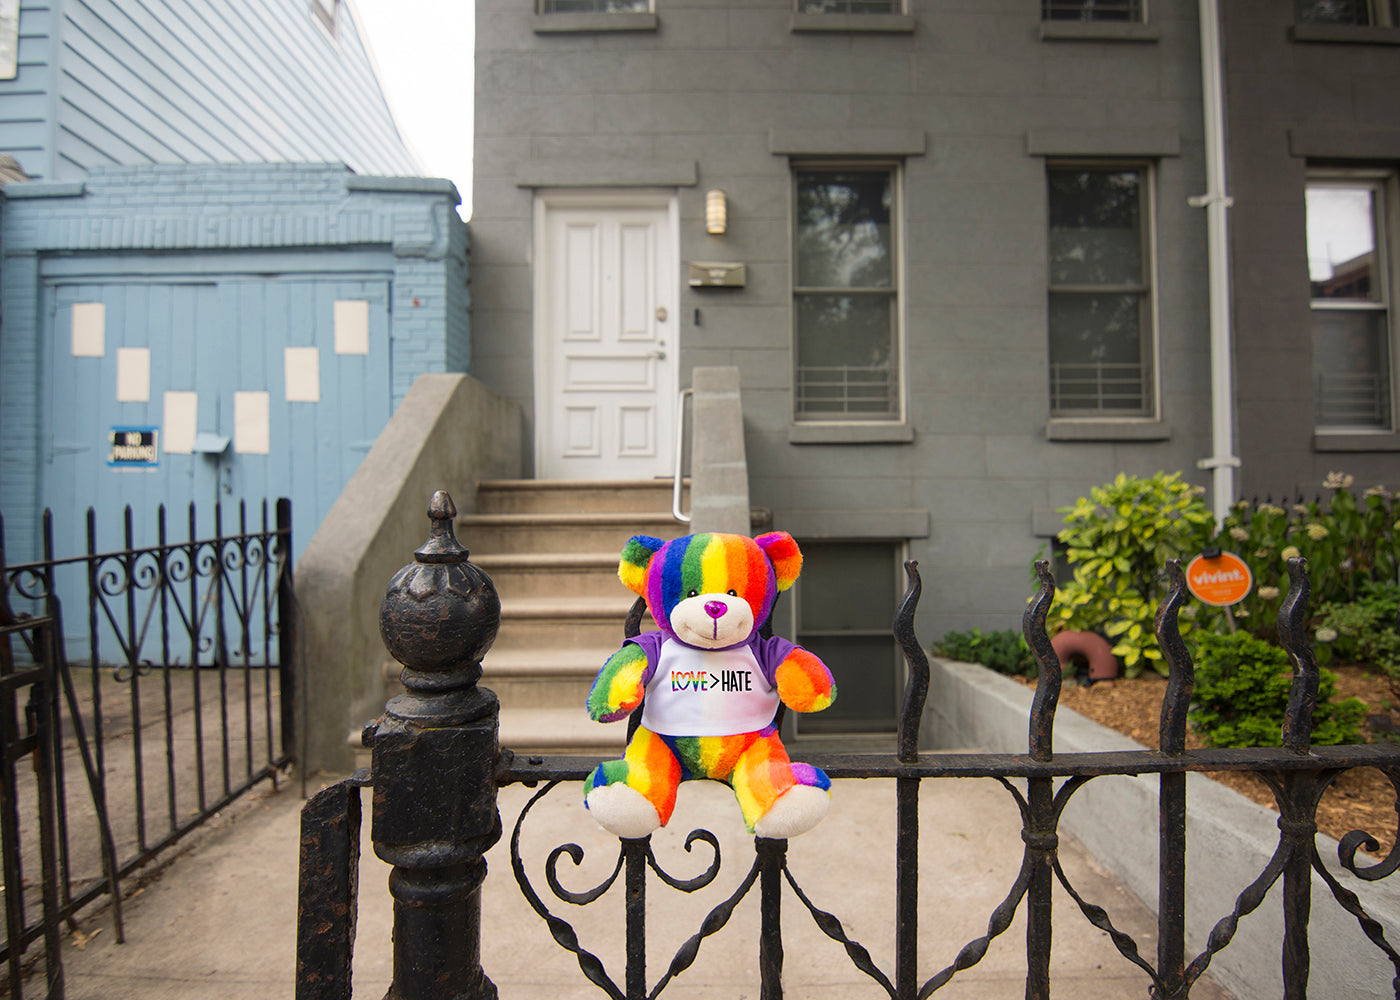 Bear Buggy®'s Totally Pride Teddy bear photographed in front of Brooklyn's Transy House for Pride, the home of trans activisit Sylvia Rivera